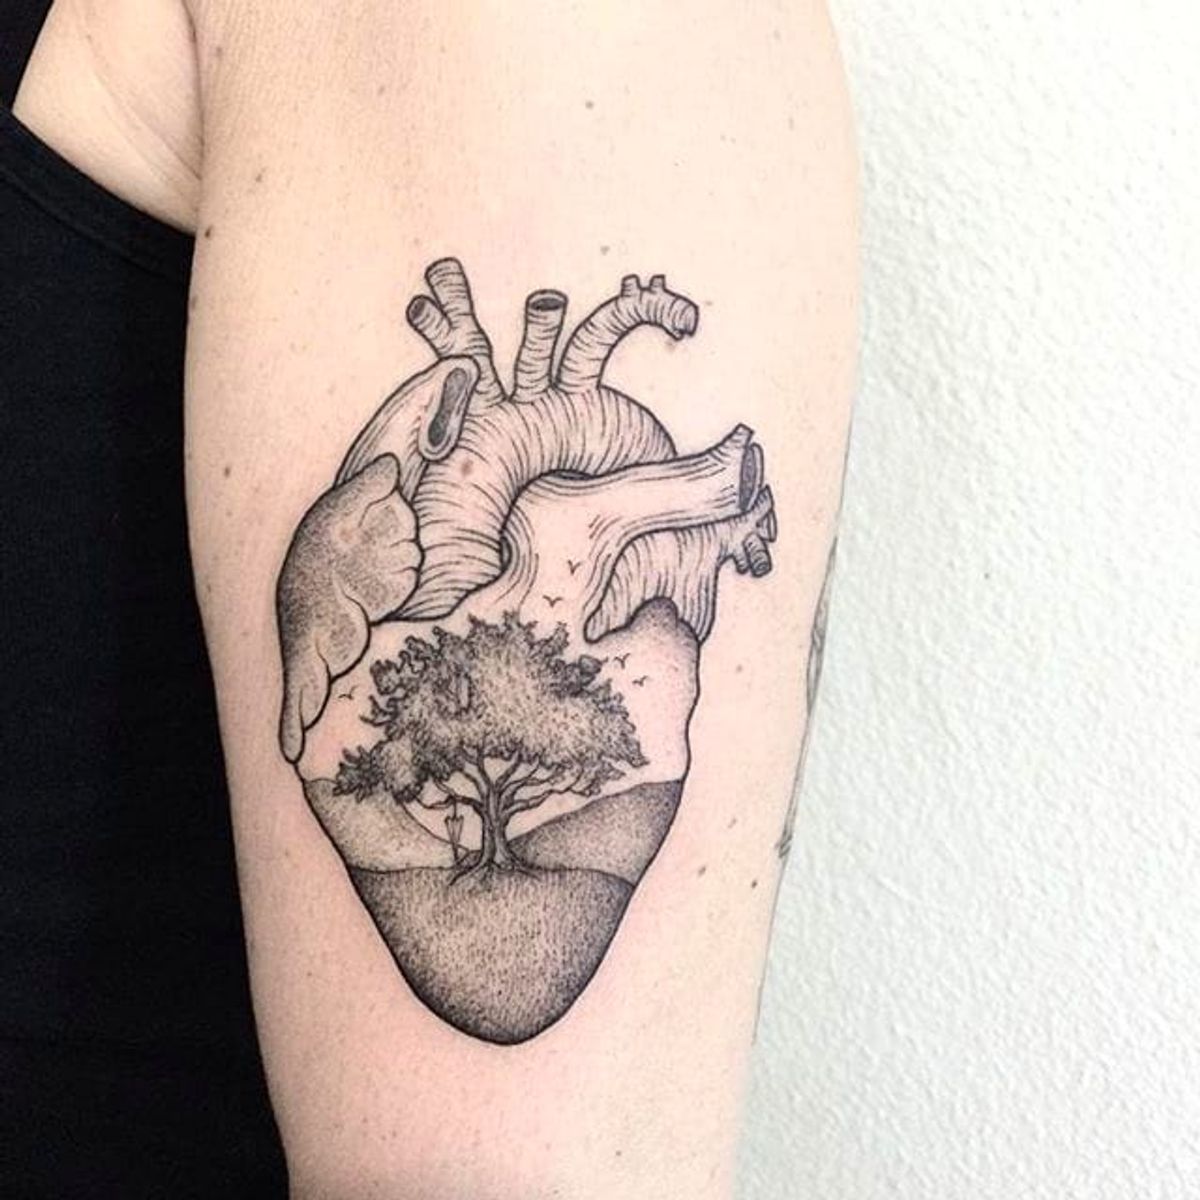 Tattoo uploaded by rcallejatattoo • Really cool heart tattoo by Anna ...